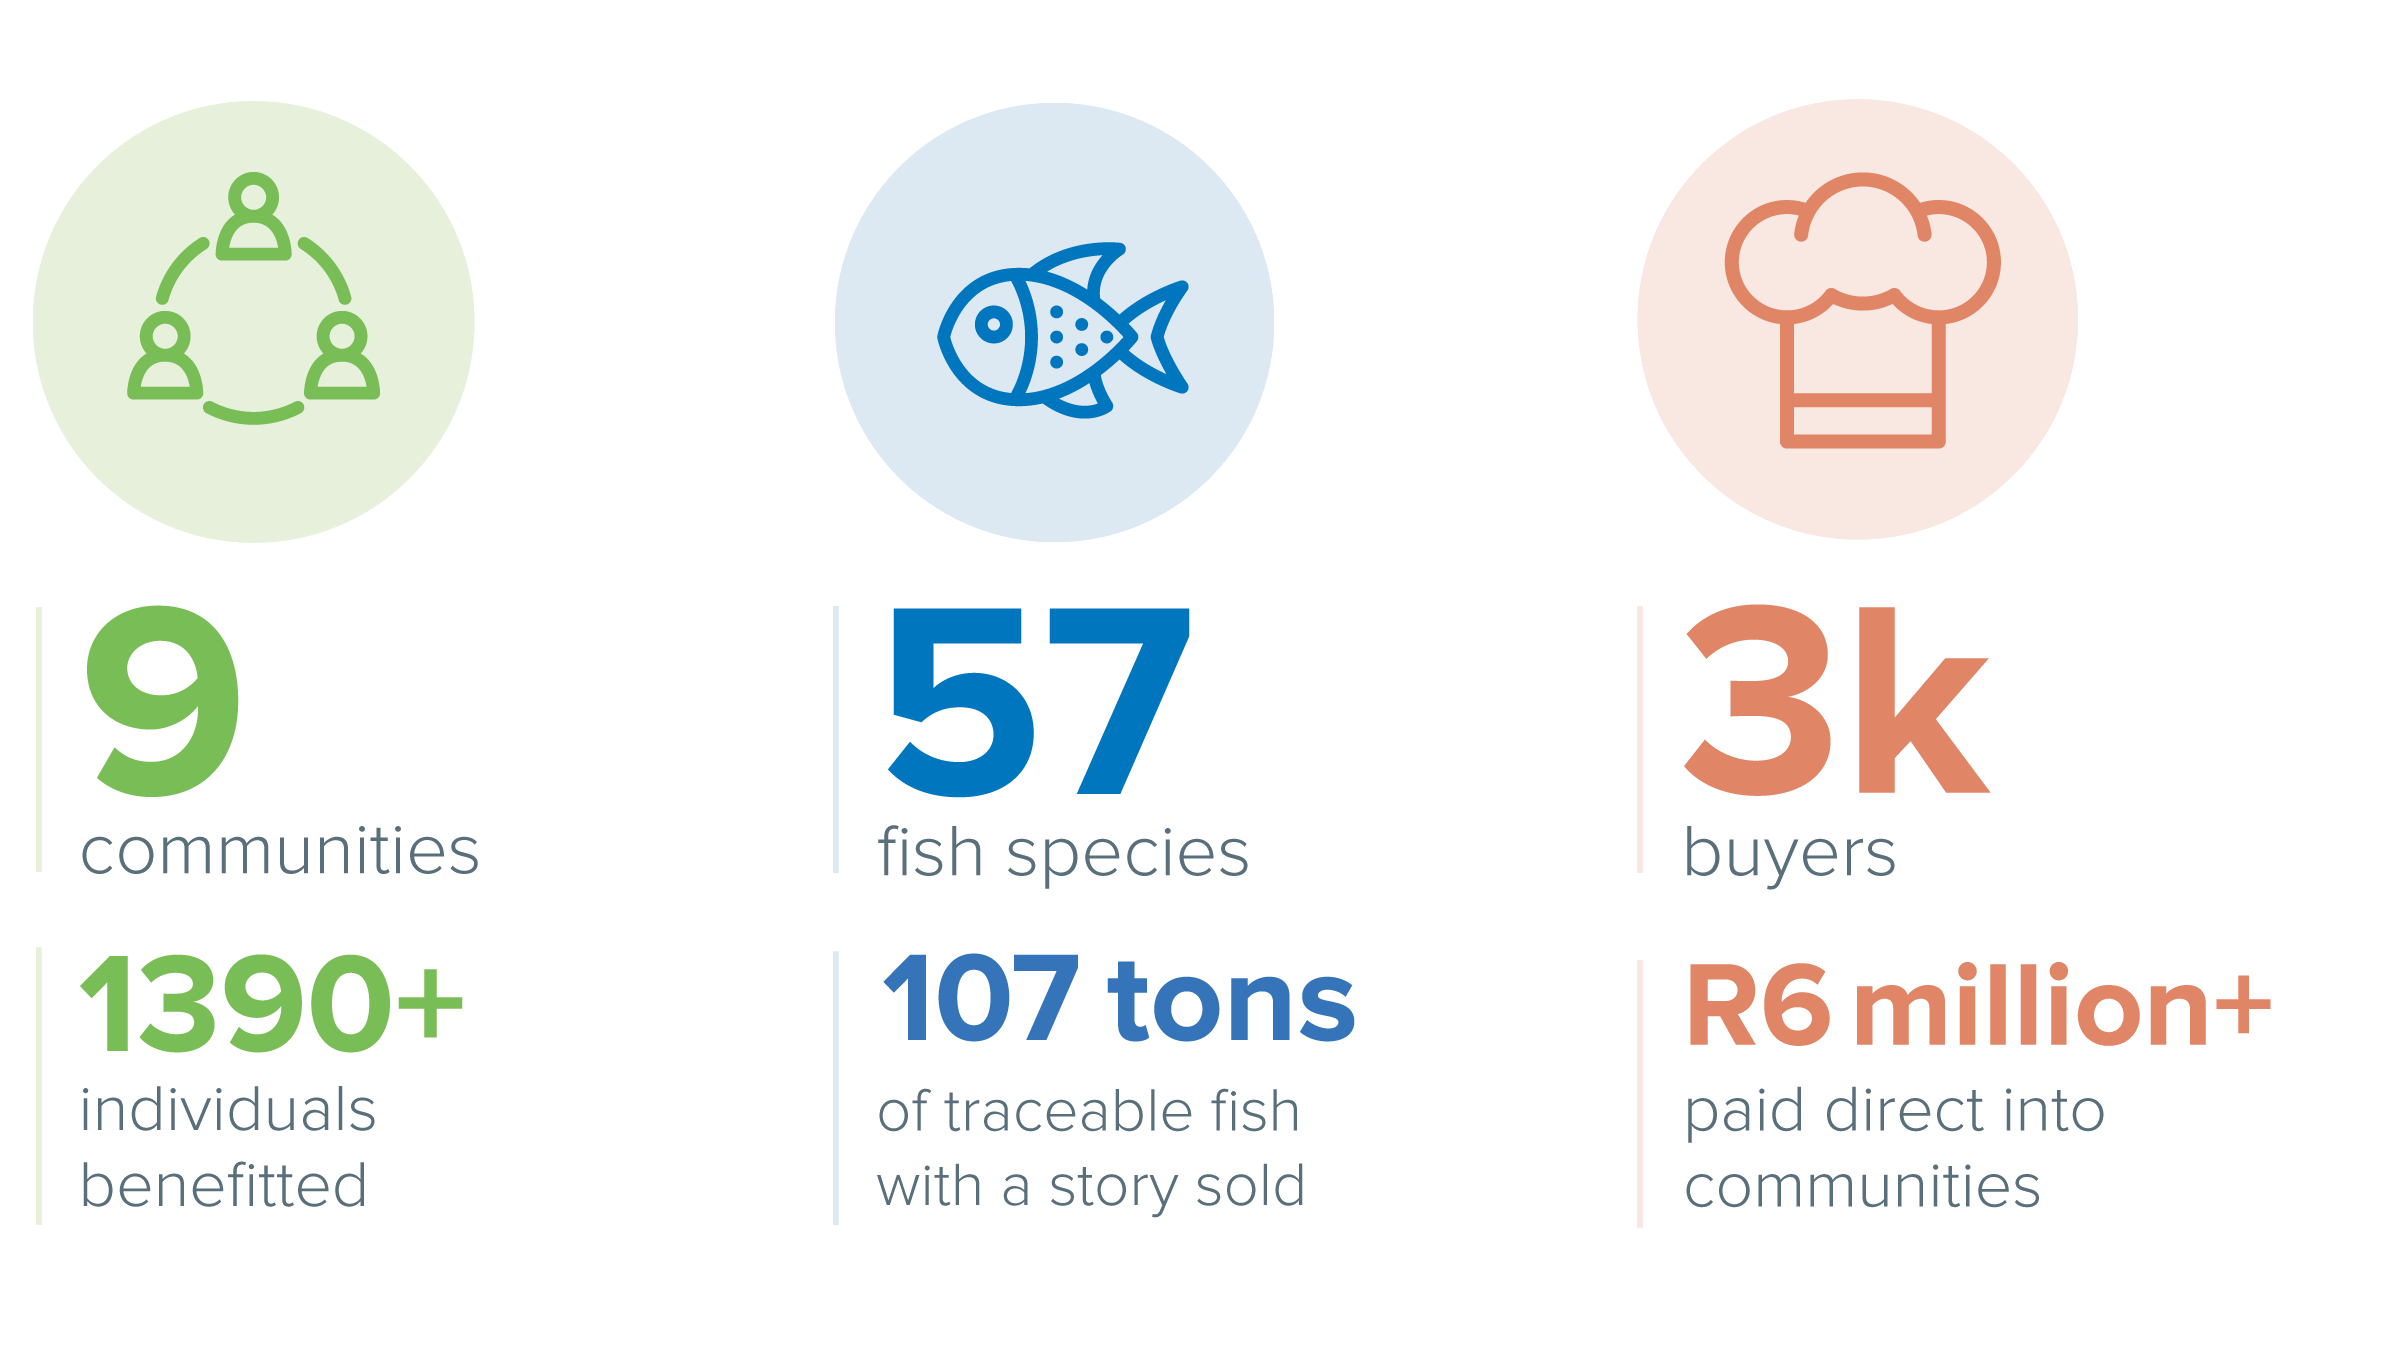 ABALOBI Infographic showing social and economic impact: 9 communities; 1390+ individuals; 57 fish species; 107 tons of traceable fish sold; 3k buyers; R6 million+ paid direct into communities